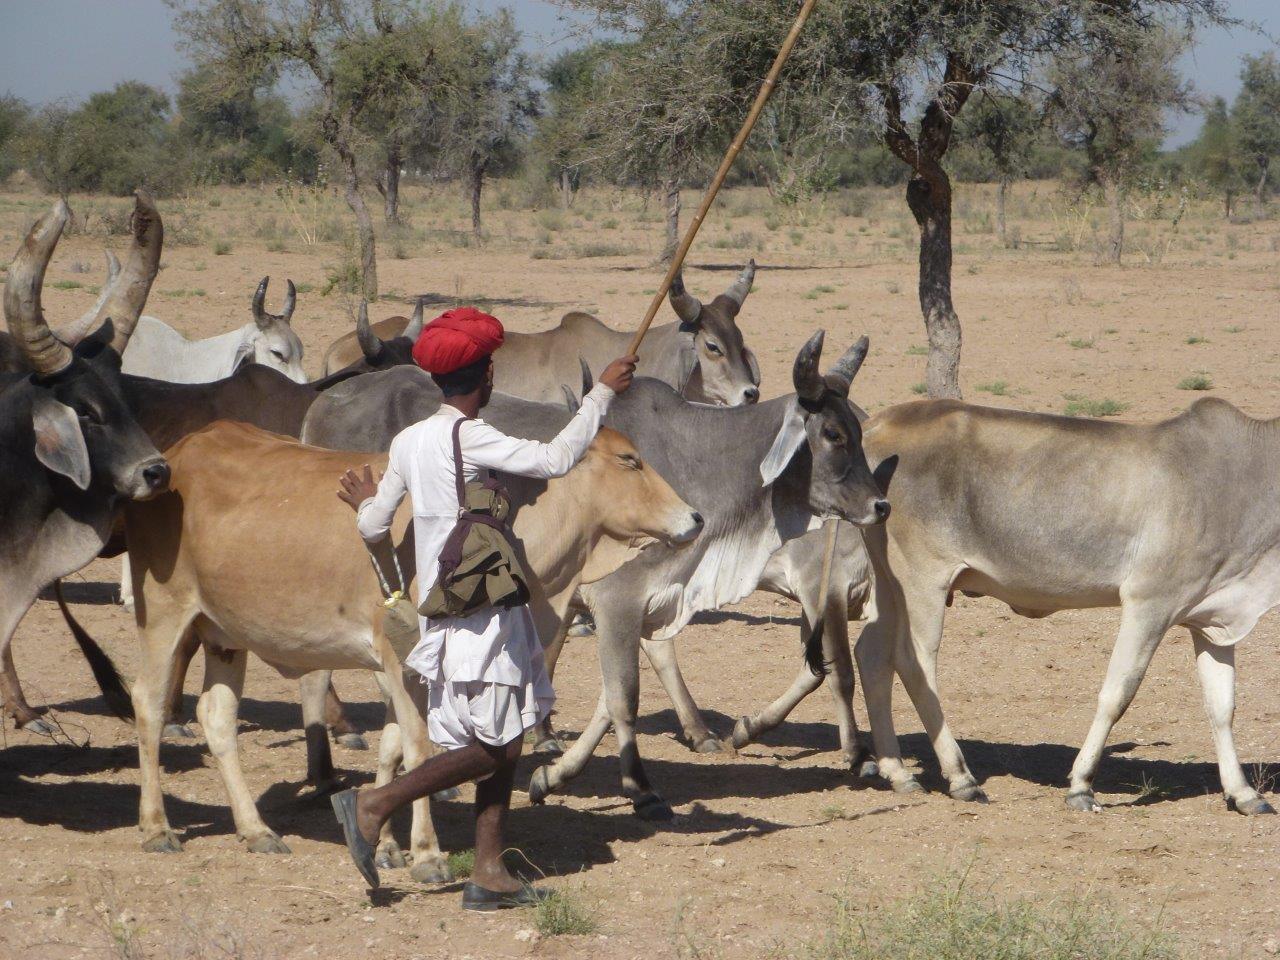 <p>With low and erratic rainfall, cattle herders in Rajasthan, India, move their herds to find water where they can (Image: CGIAR / <a href="https://www.flickr.com/photos/crp_drylands/14456498773/in/photostream/">Flickr</a> / <a href="https://creativecommons.org/licenses/by-nc-nd/2.0/">CC BY-NC-ND 2.0</a>)</p>